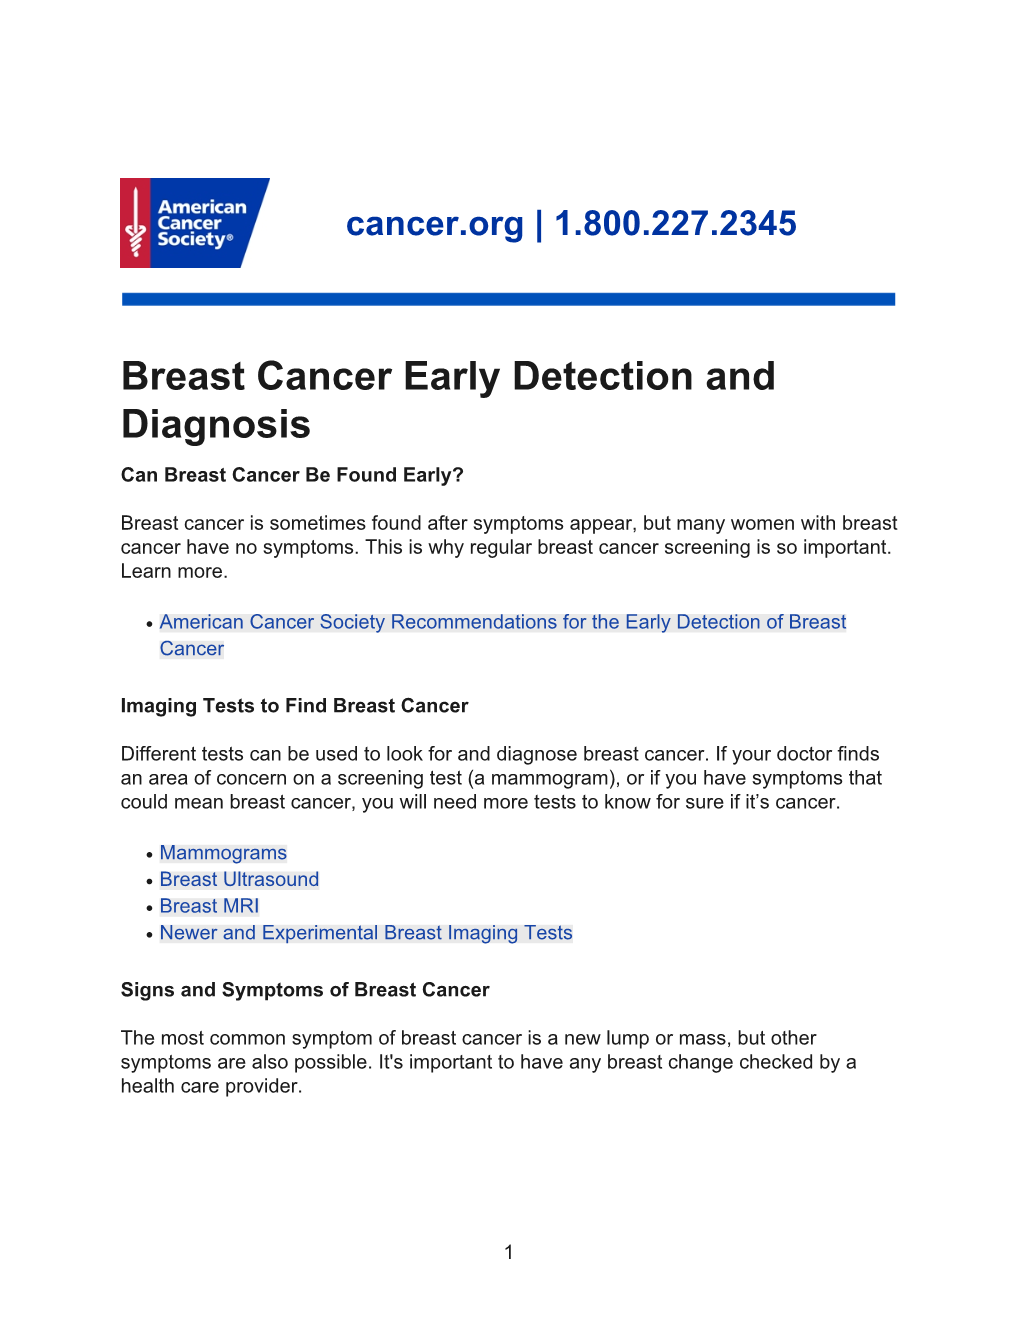 Breast Cancer Early Detection and Diagnosis Can Breast Cancer Be Found Early?